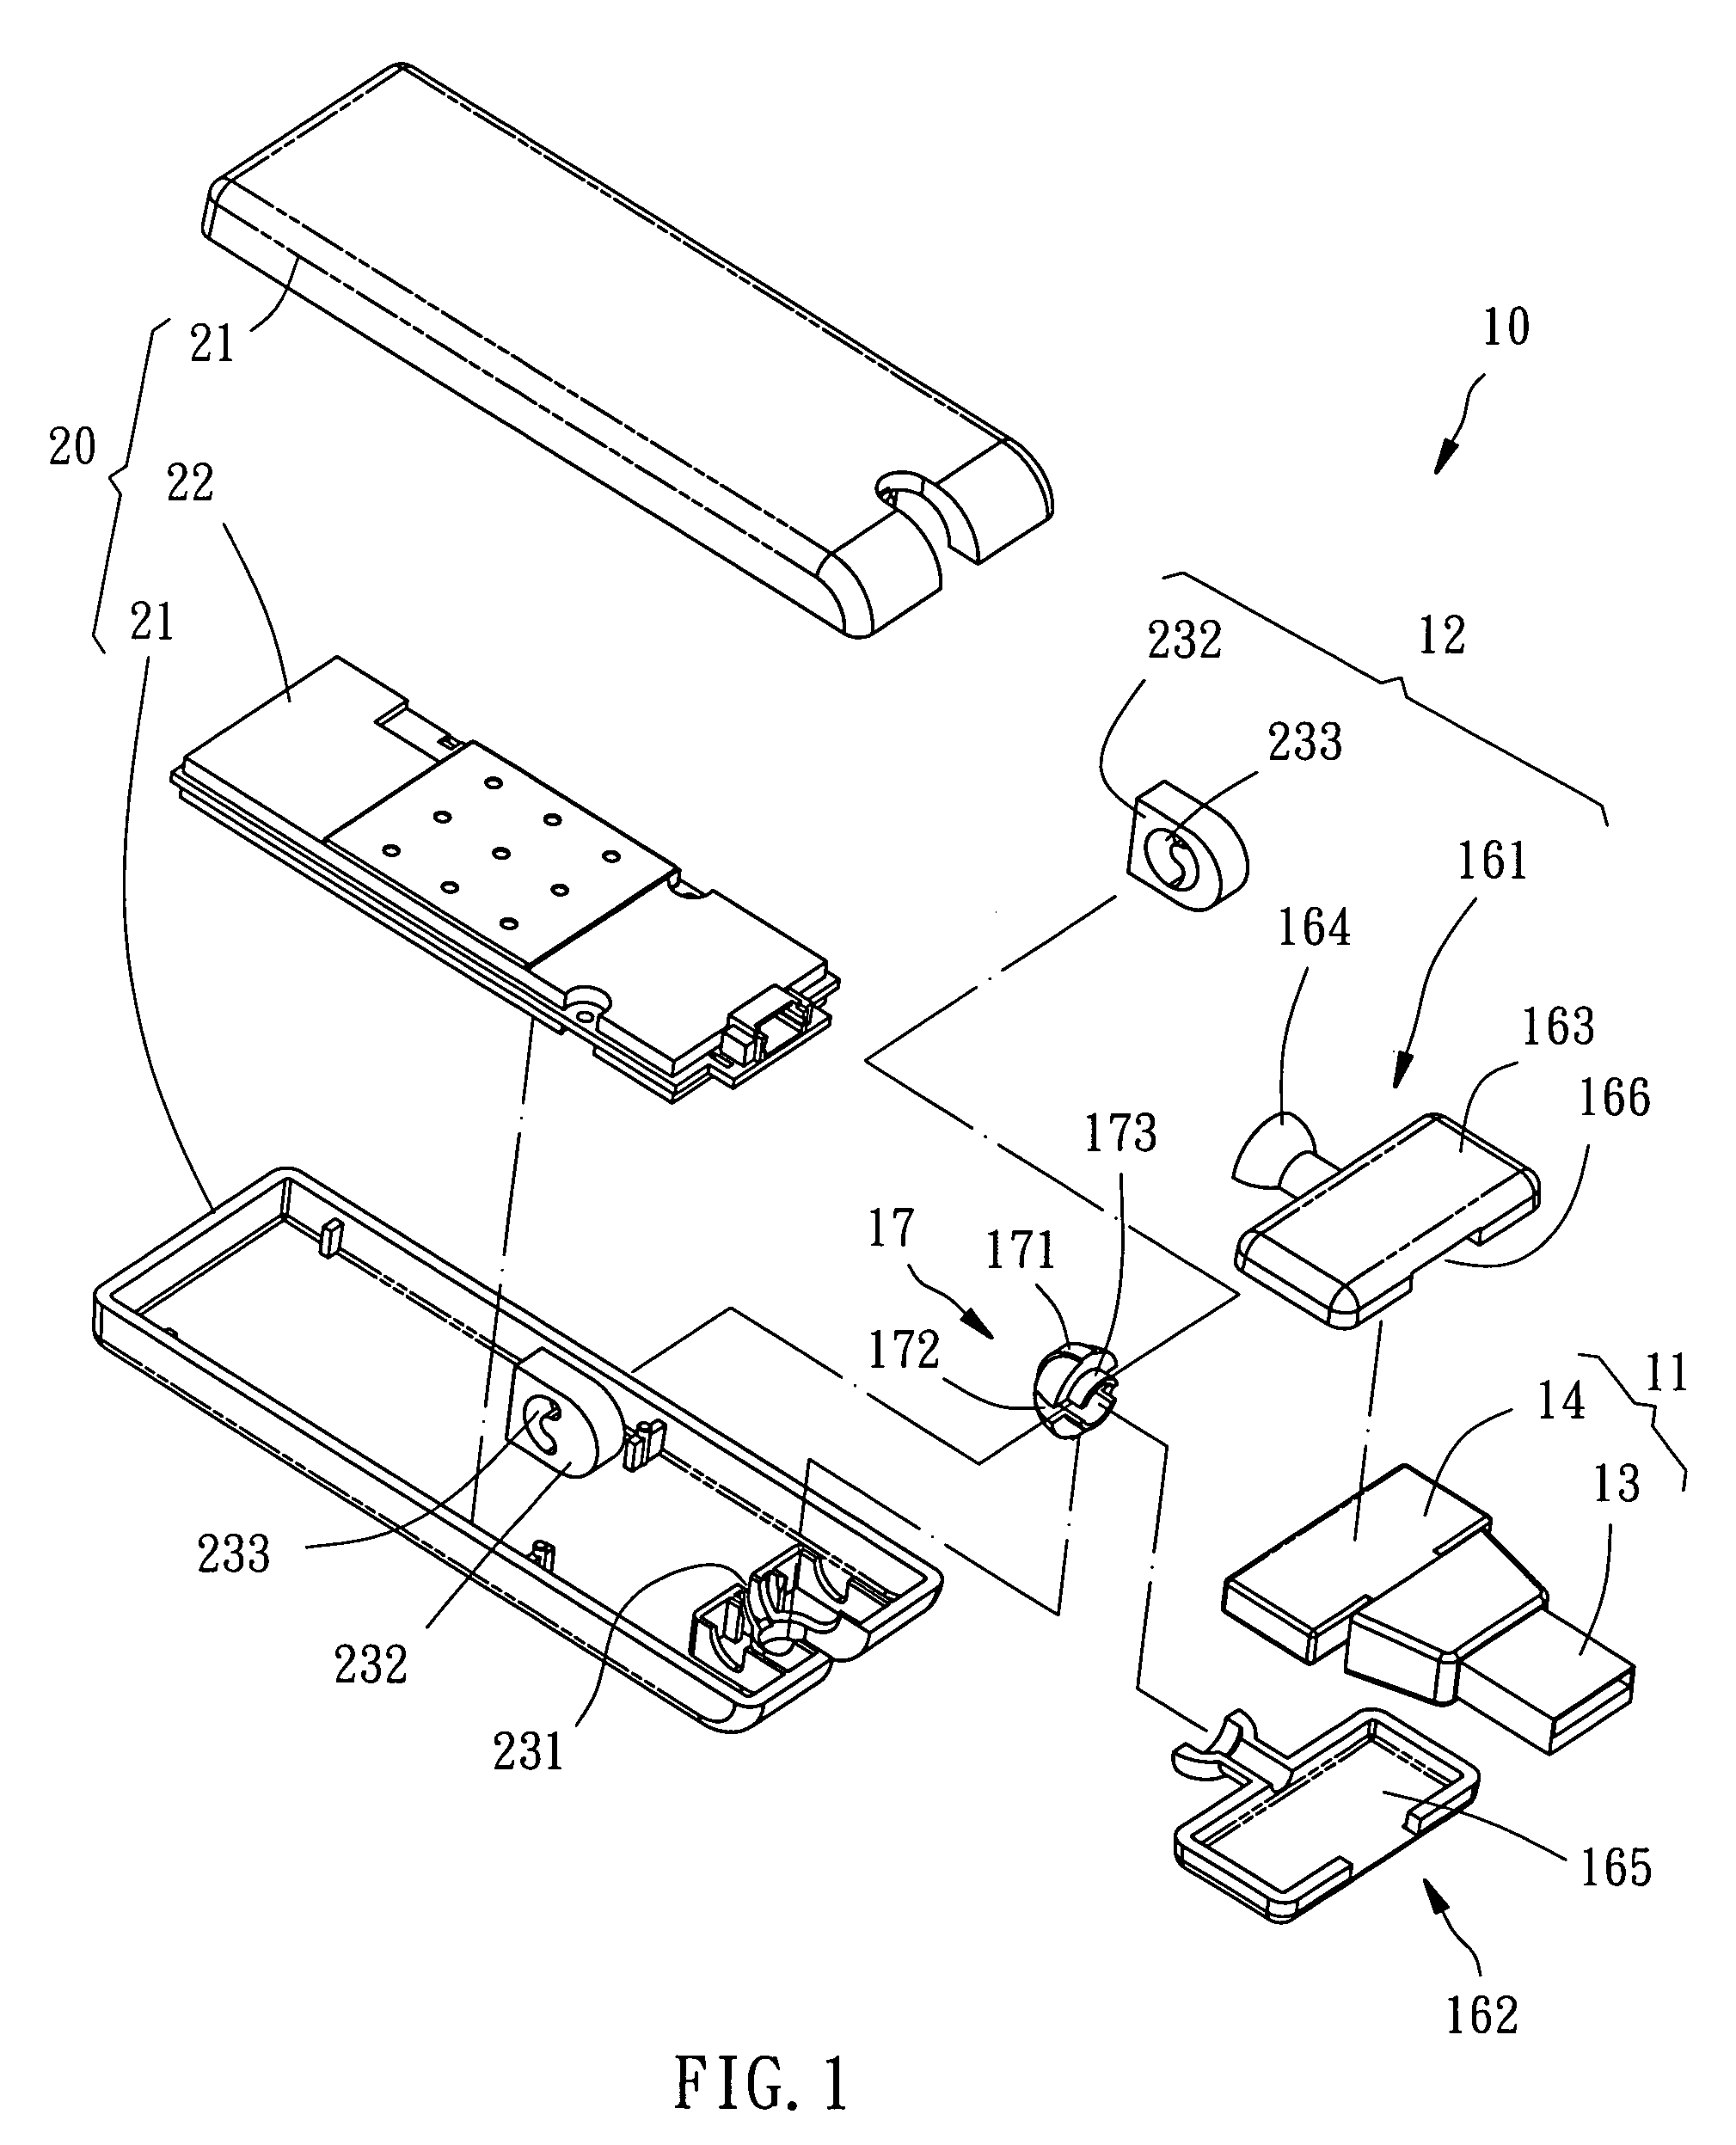 Electronic device capable of multidirectional rotation